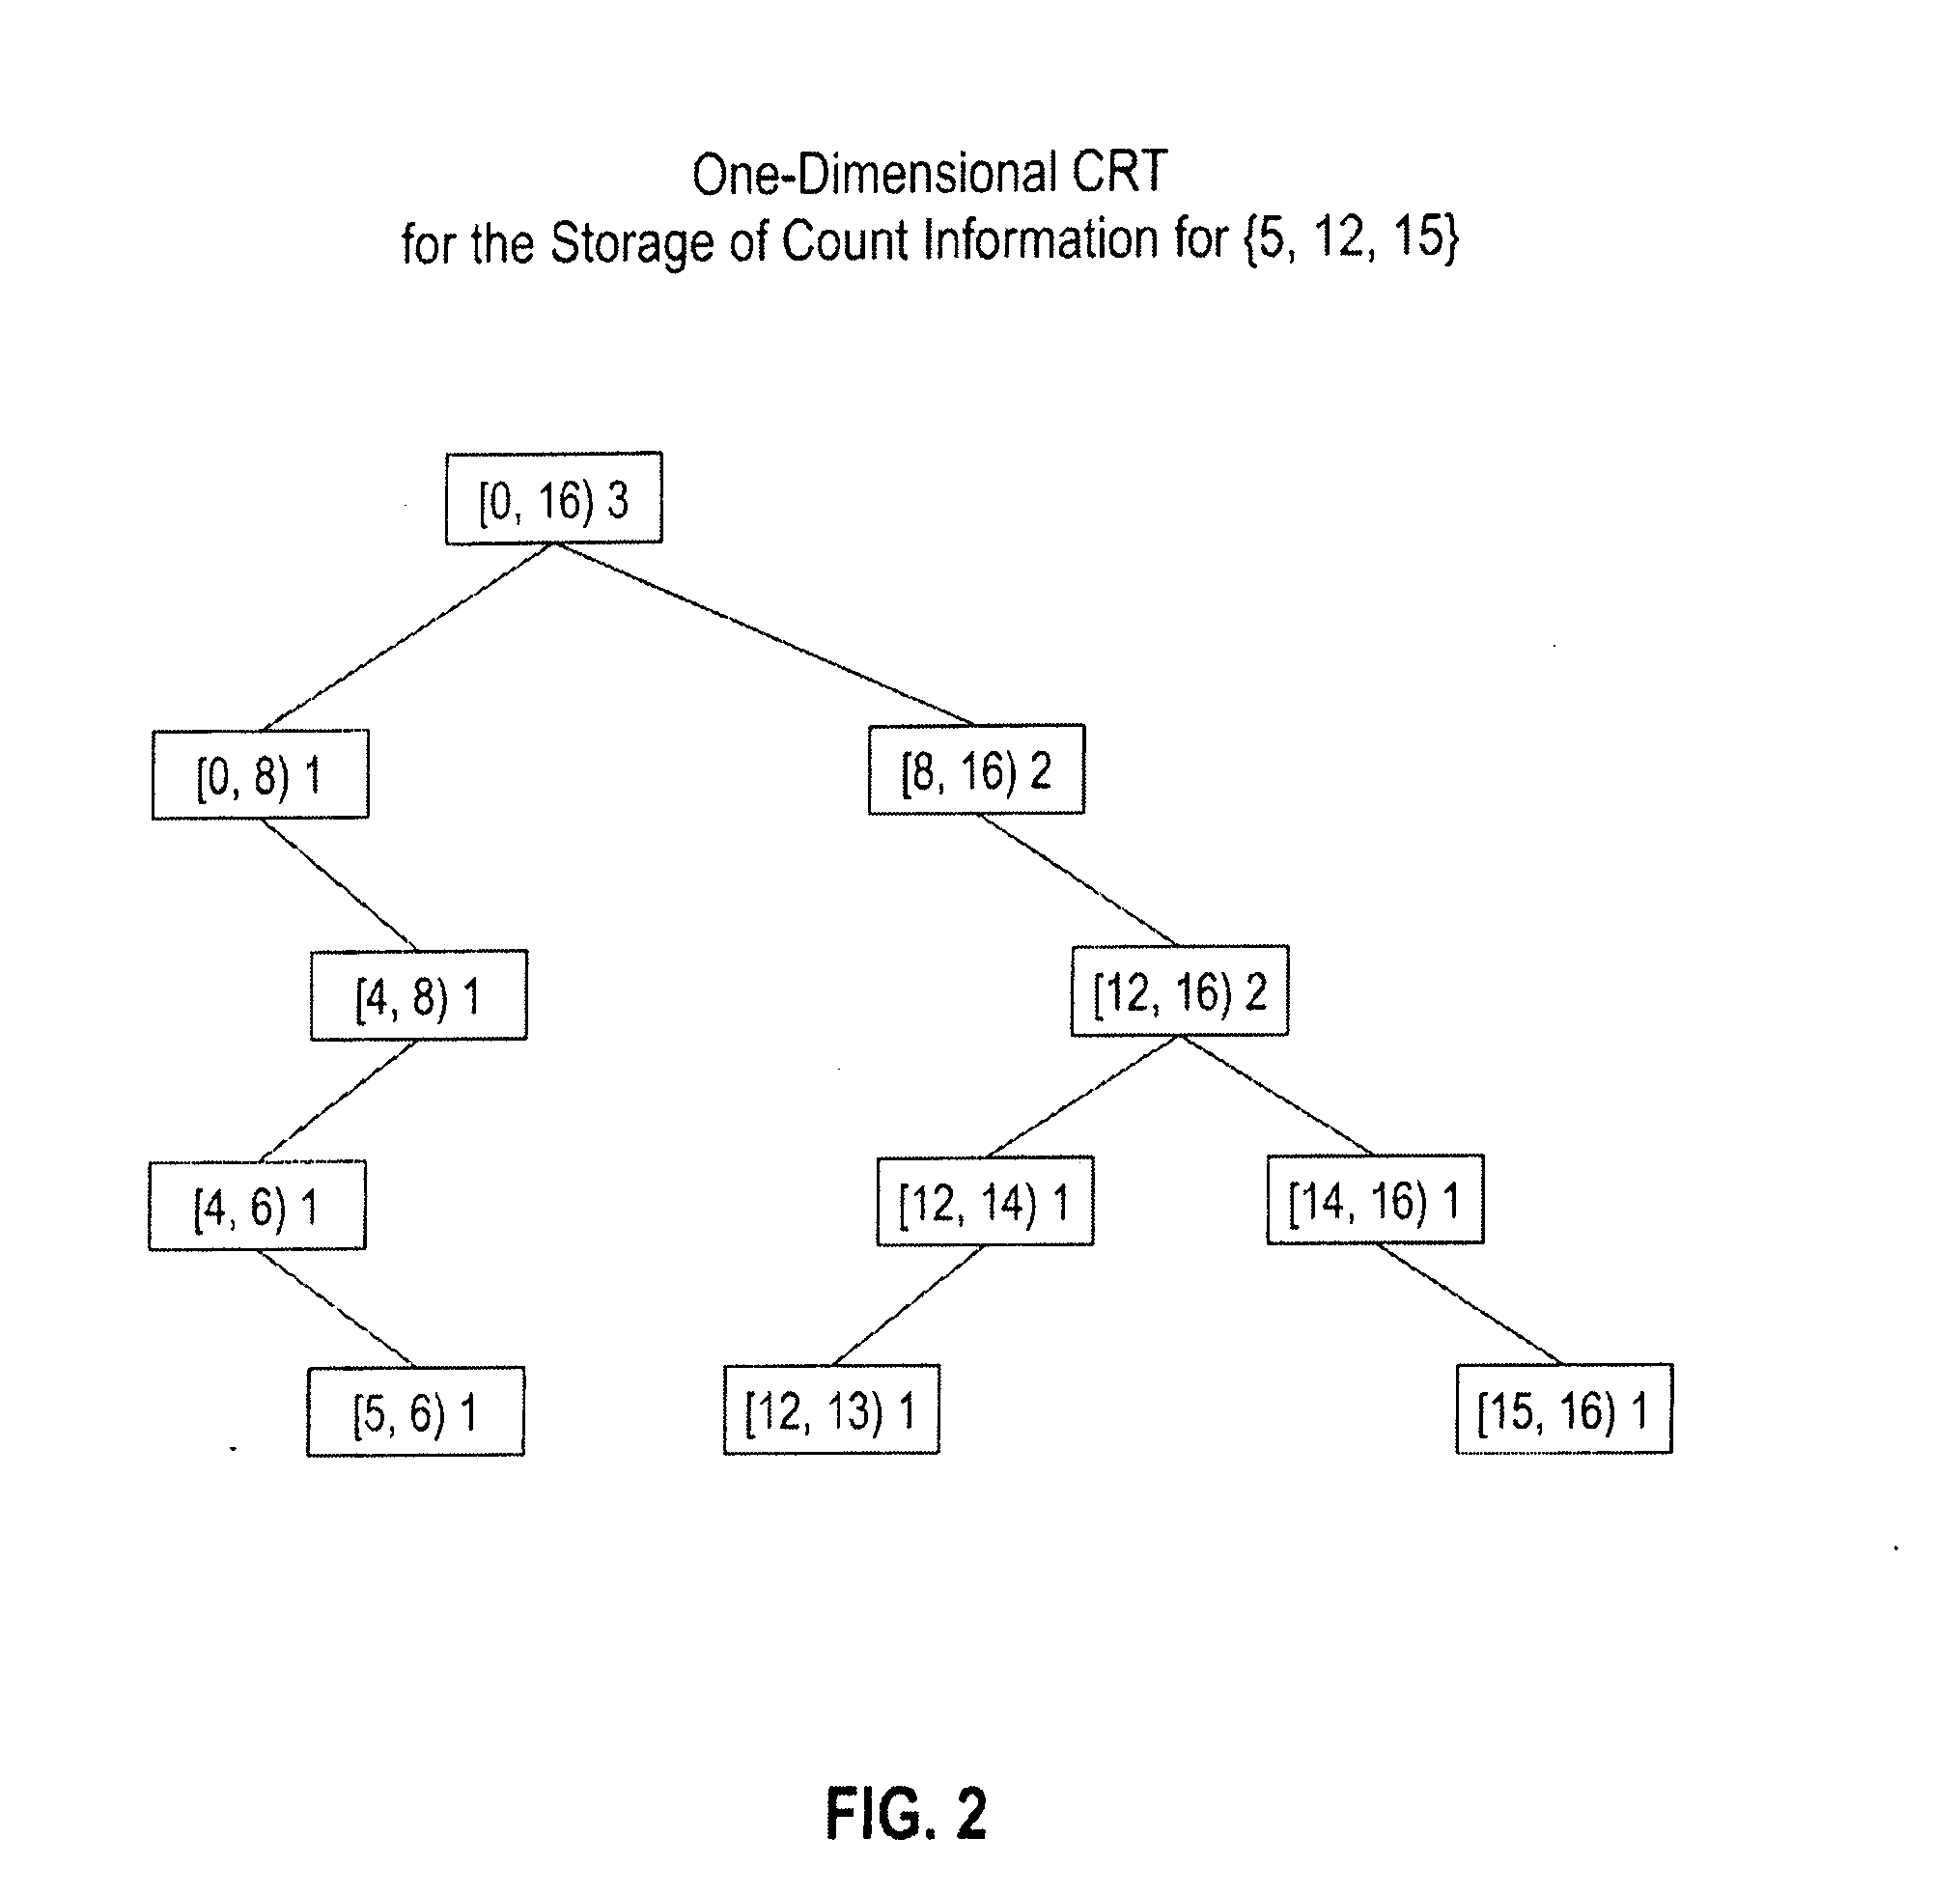 System and method for privacy preserving query verification